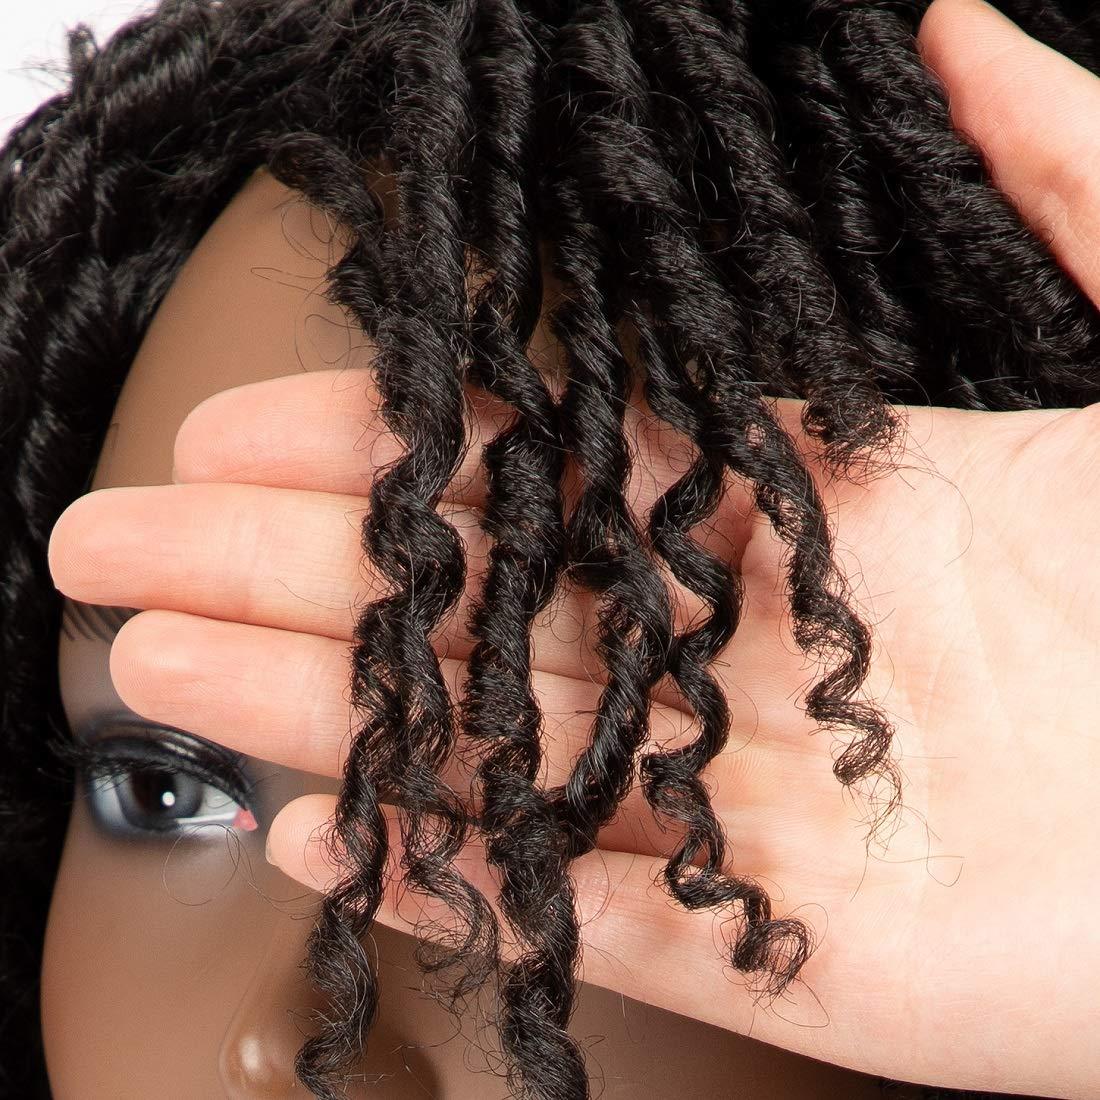 New Twisted Braid Hair Afro Curly Wigs Short Braided Wigs for Black Women